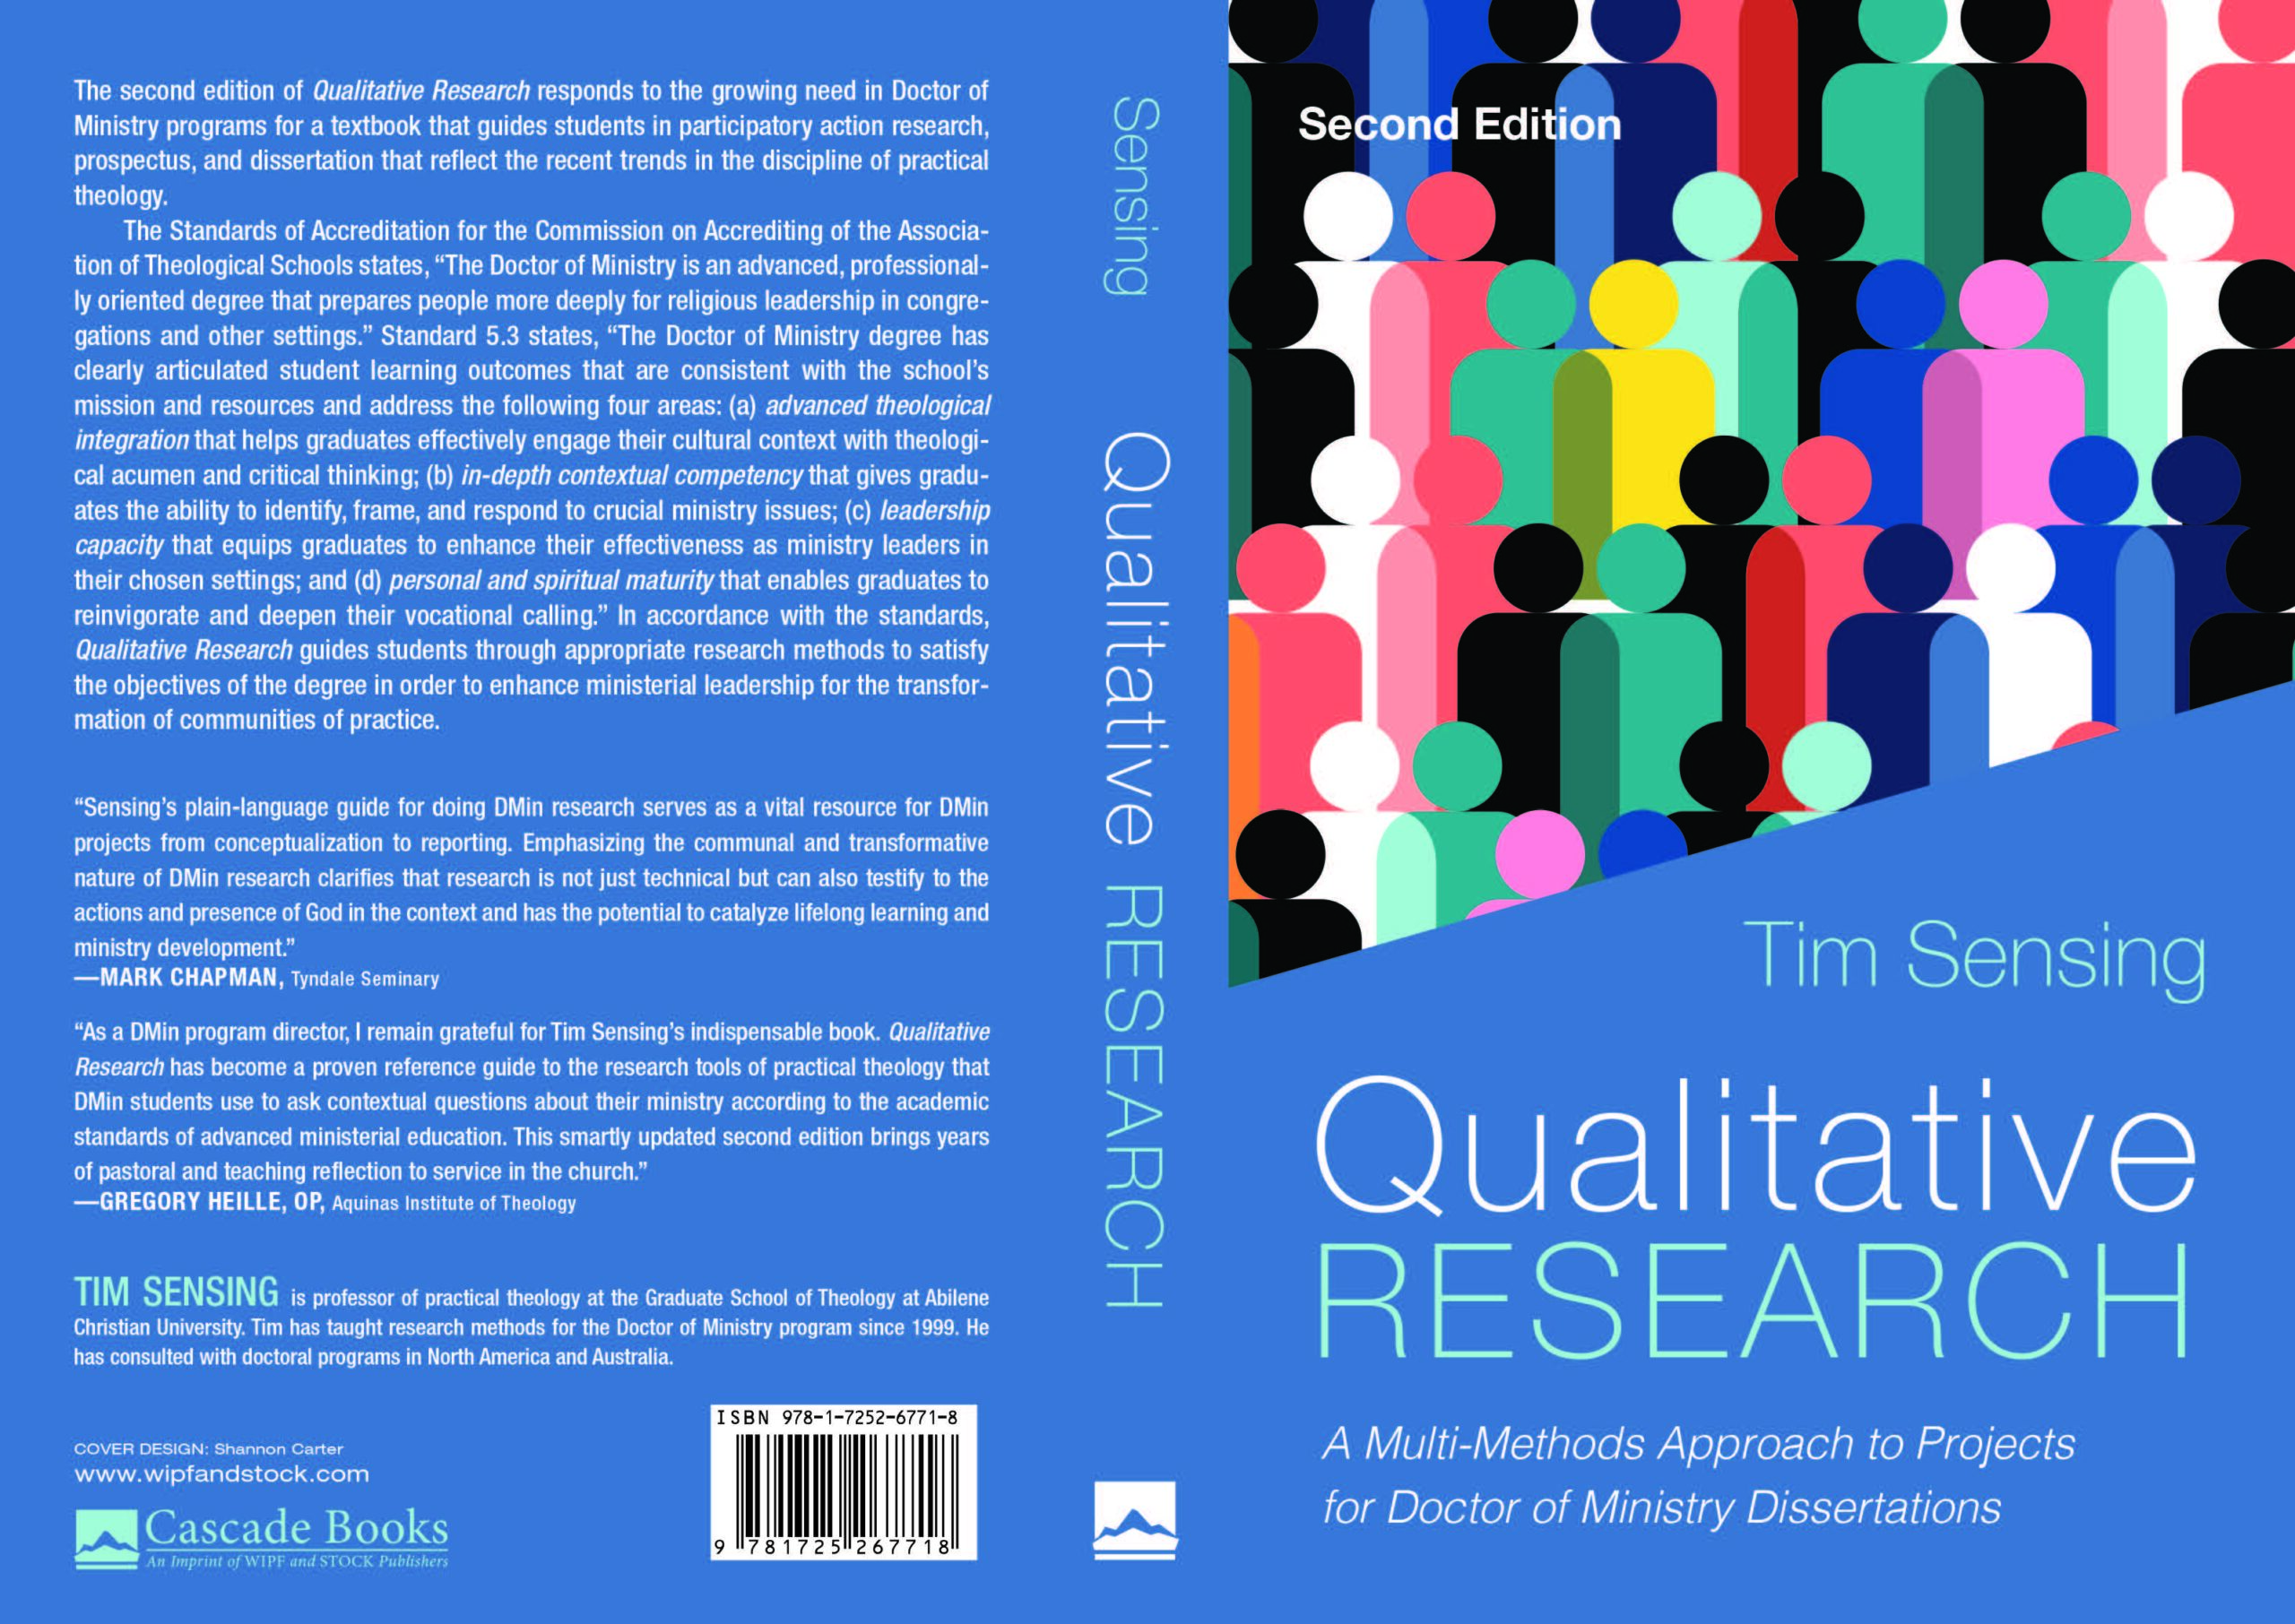 Qualitative Research, Second Edition, 2022